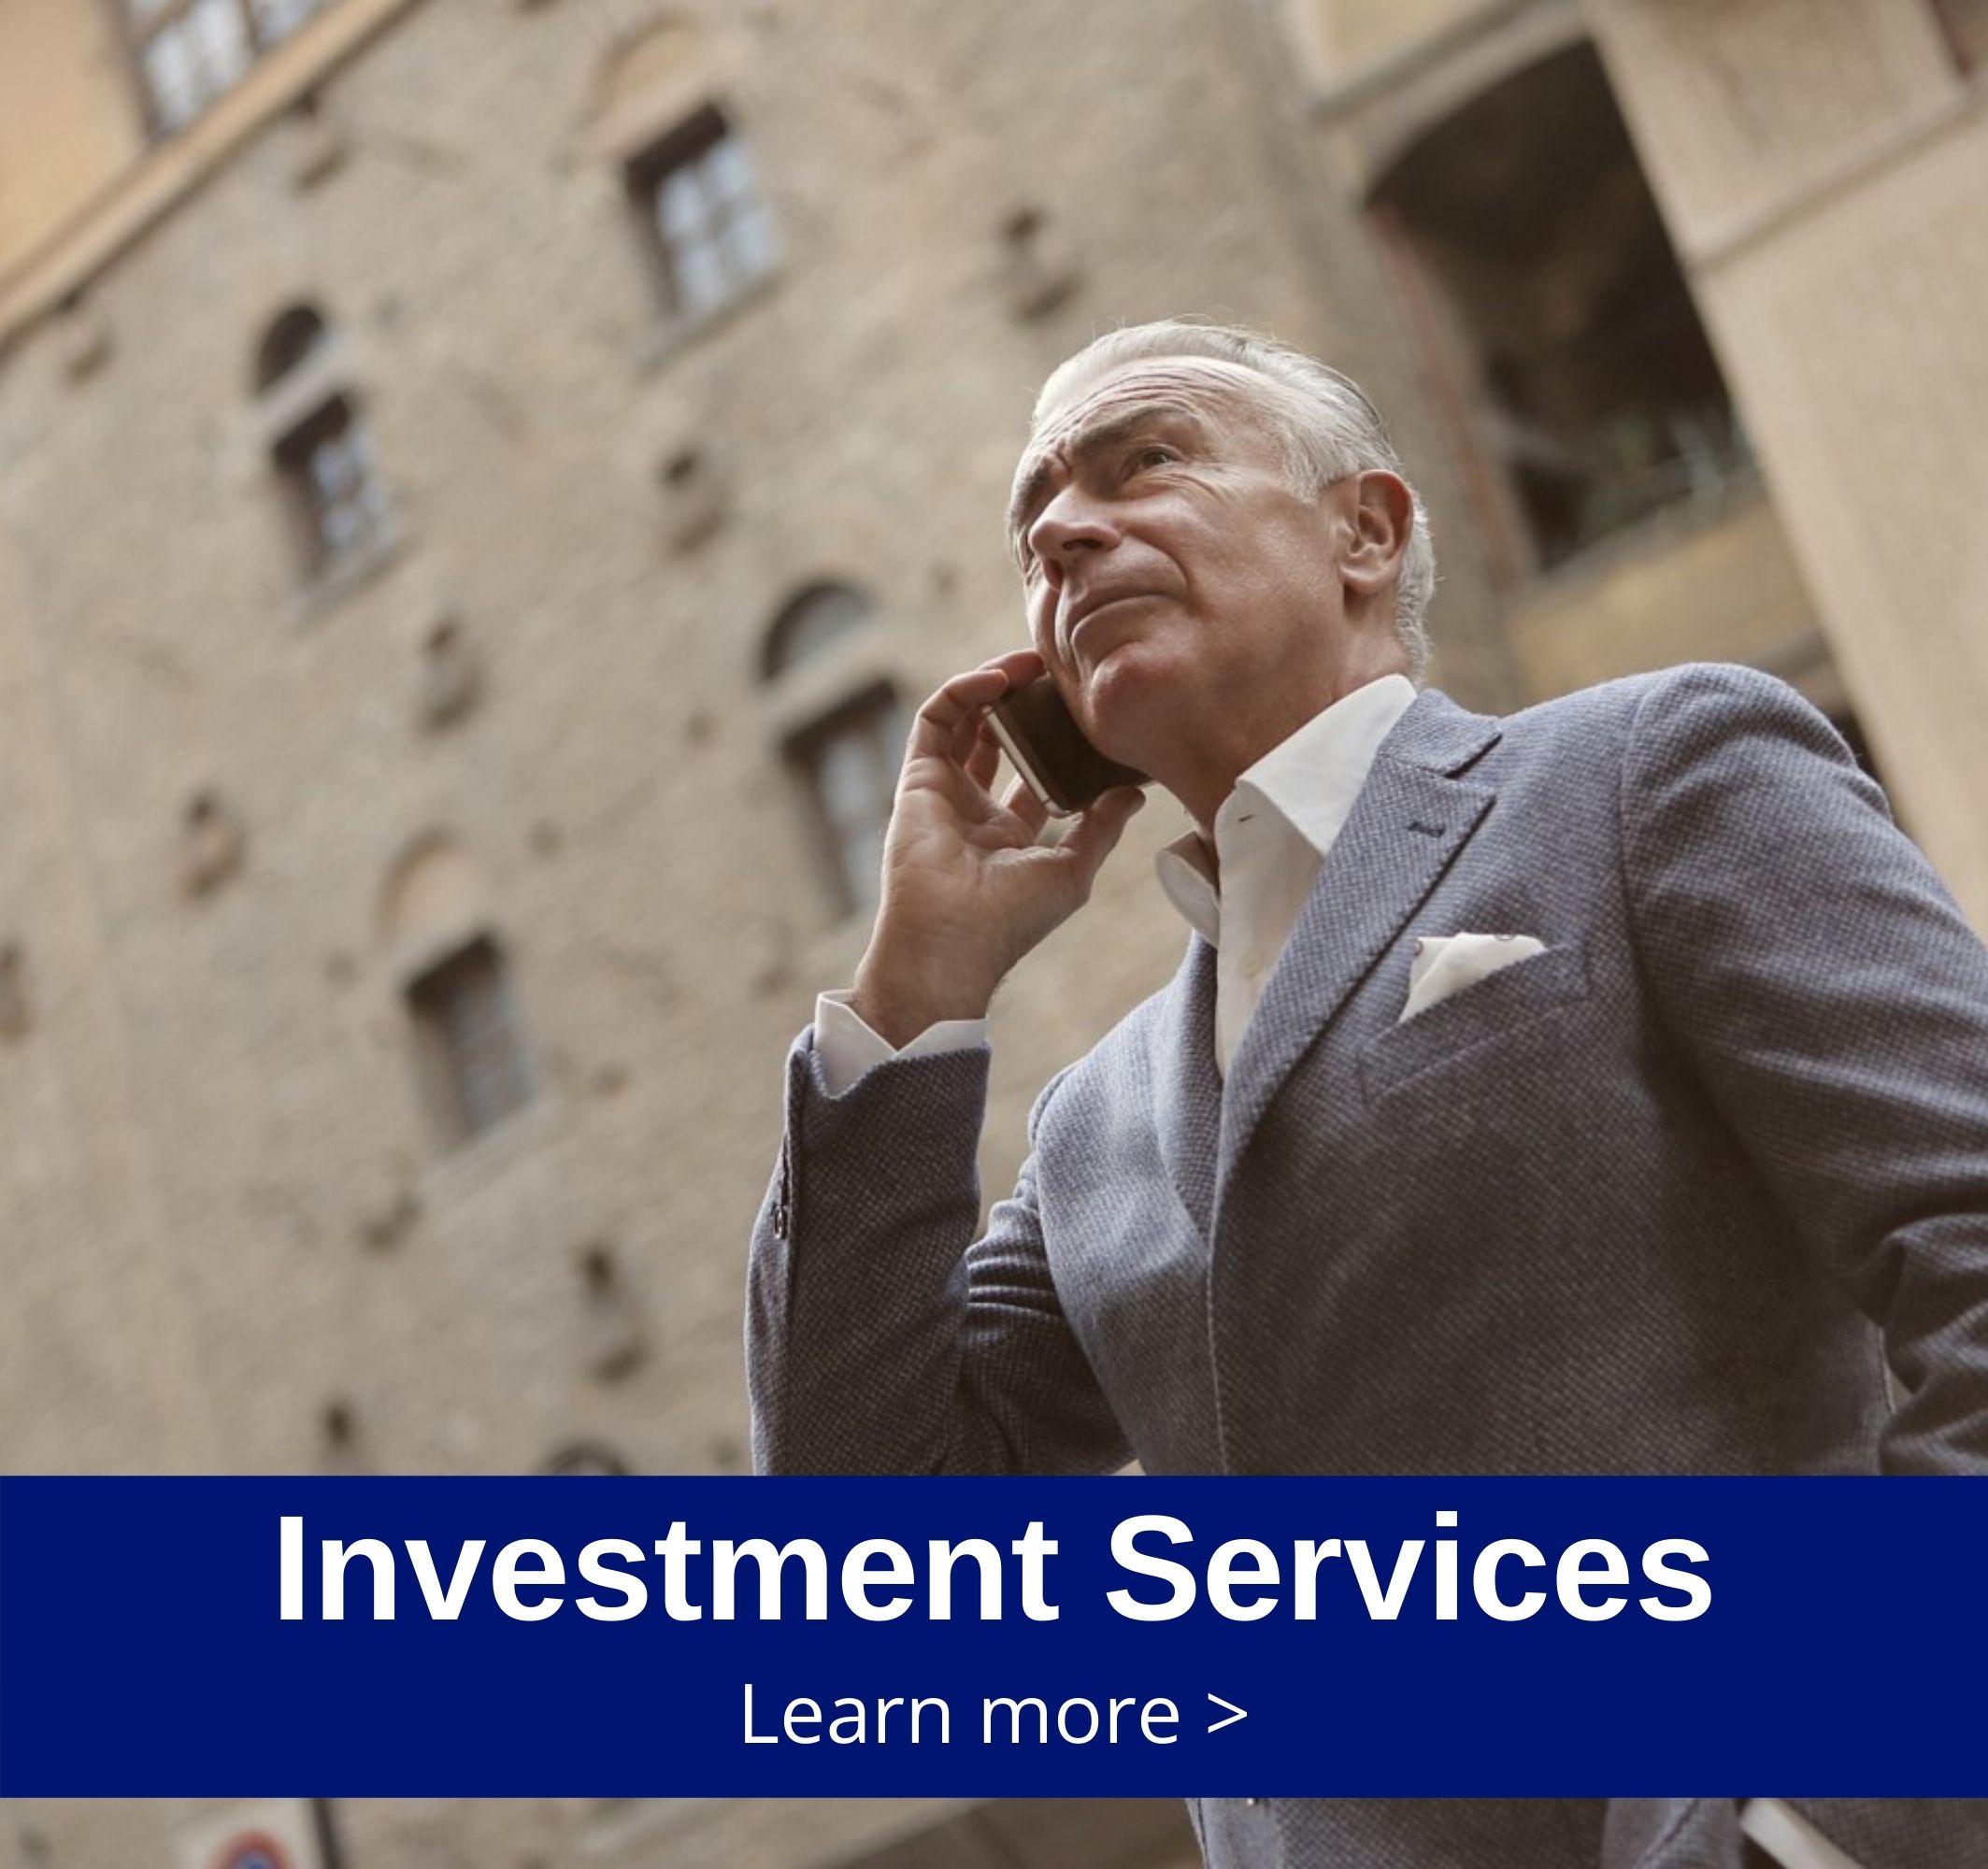 Investment advice services